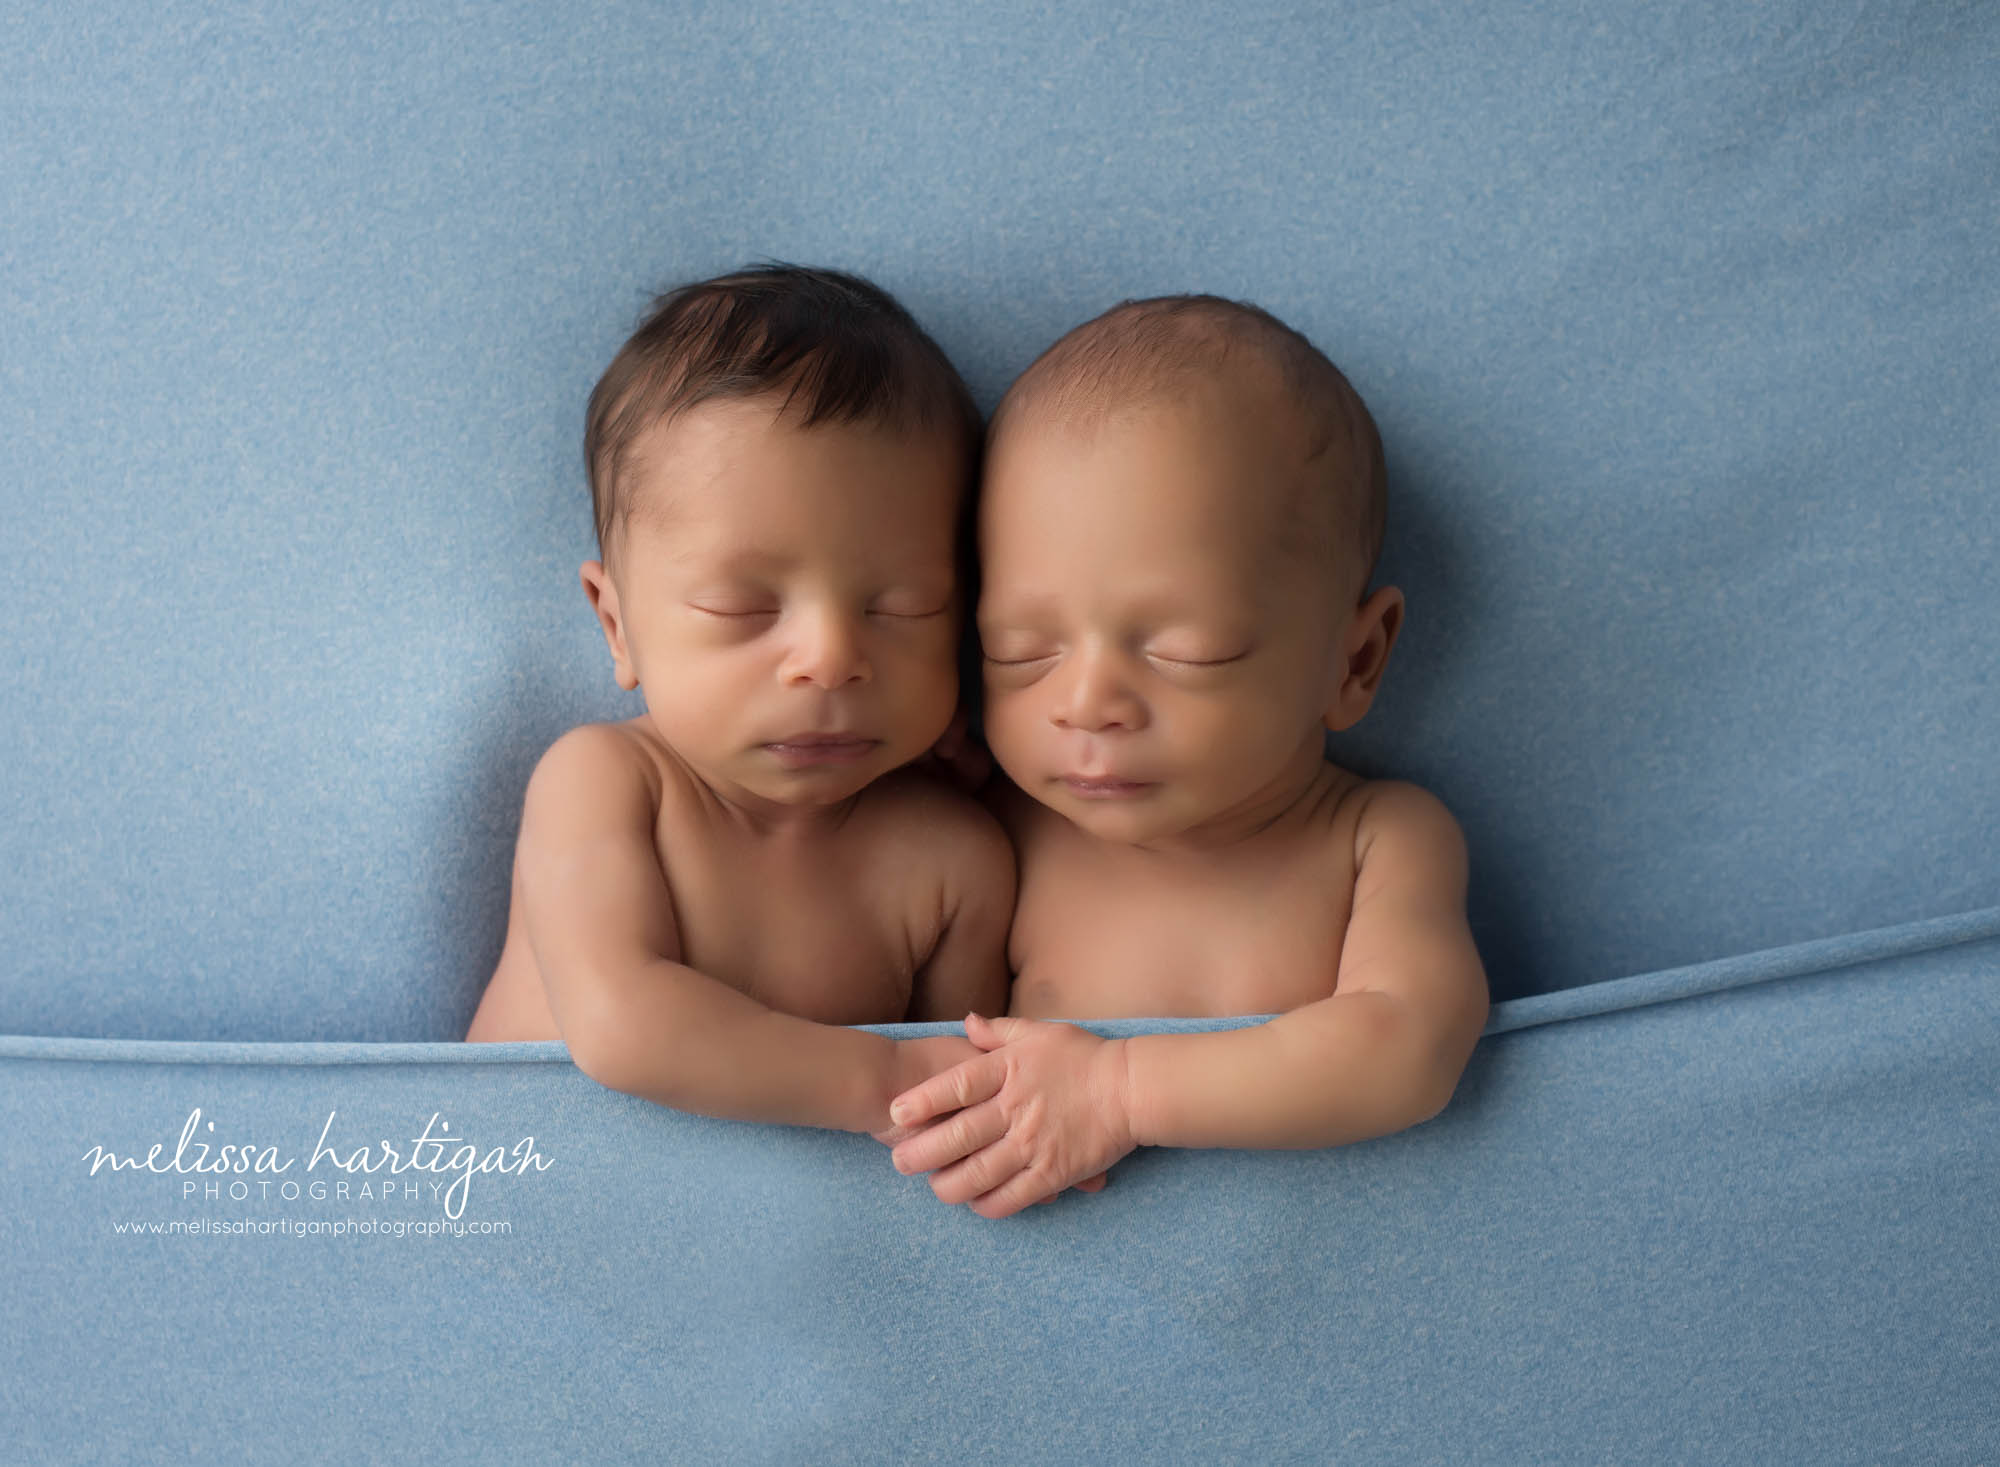 newborn baby boys posed in blue backdrop tucked in sleeping pose newborn photography CT